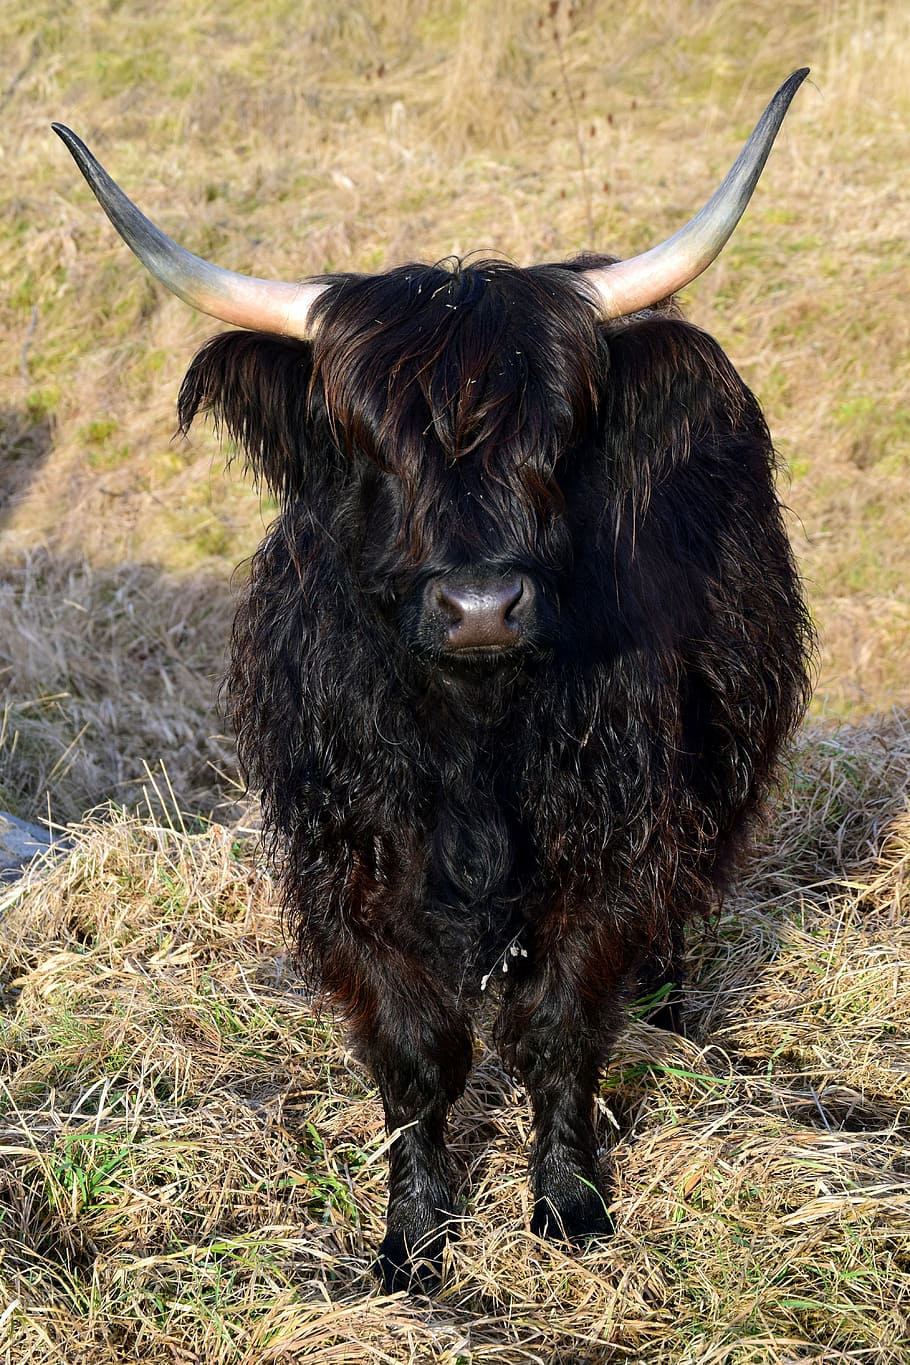 highland beef, scottish, galloway, horns, black, shaggy, wild, cow, beef, frontal